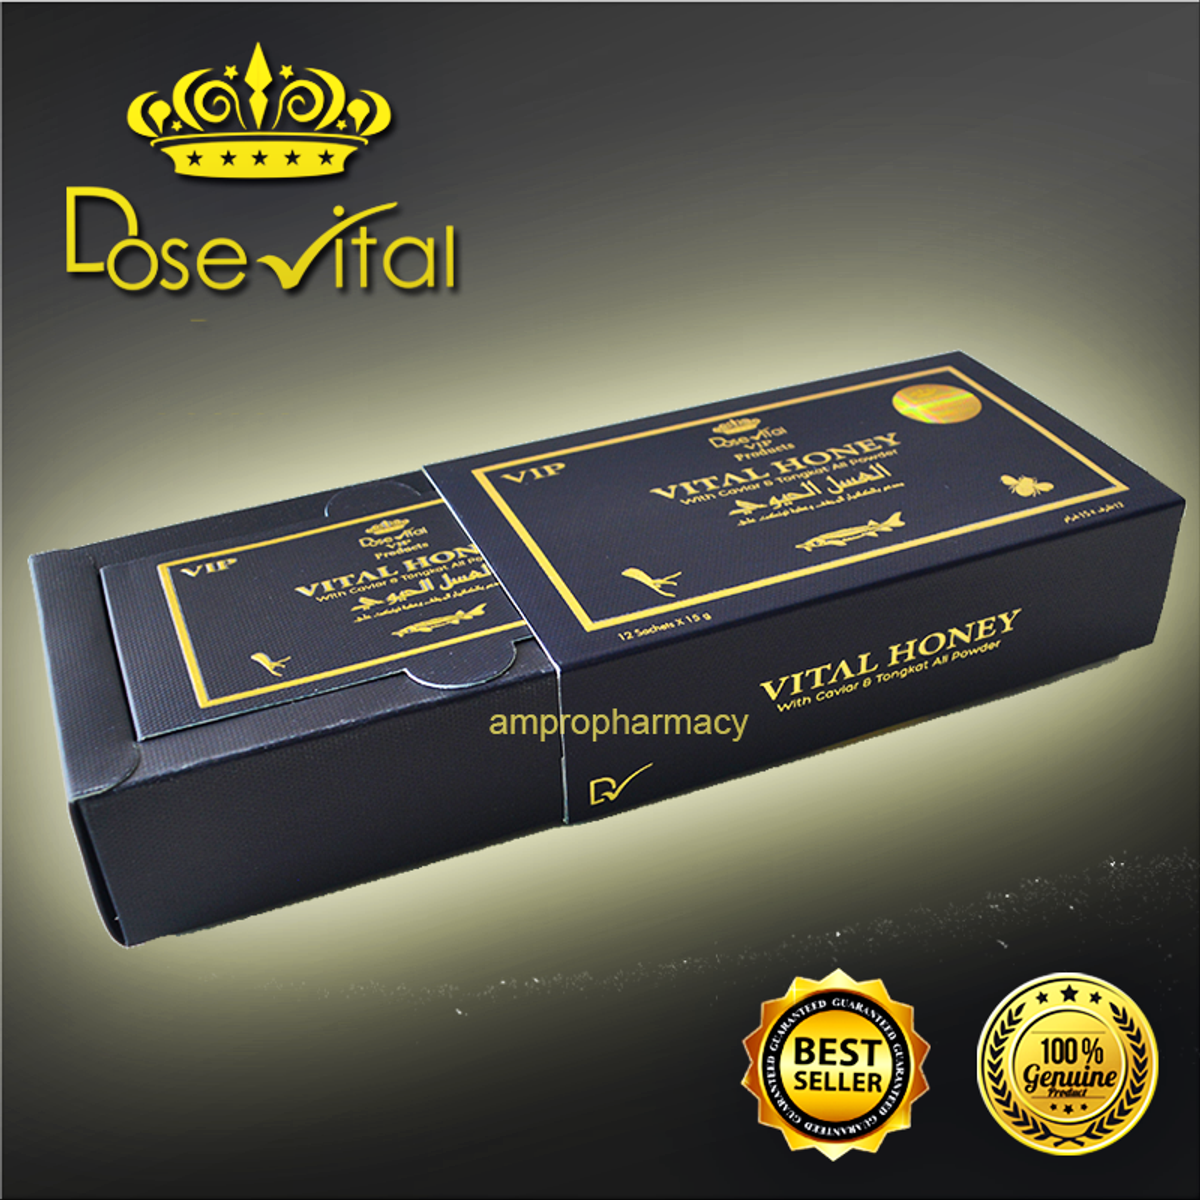 Dose Vital Honey VIP For Him For Mens Health & Sexual Booster